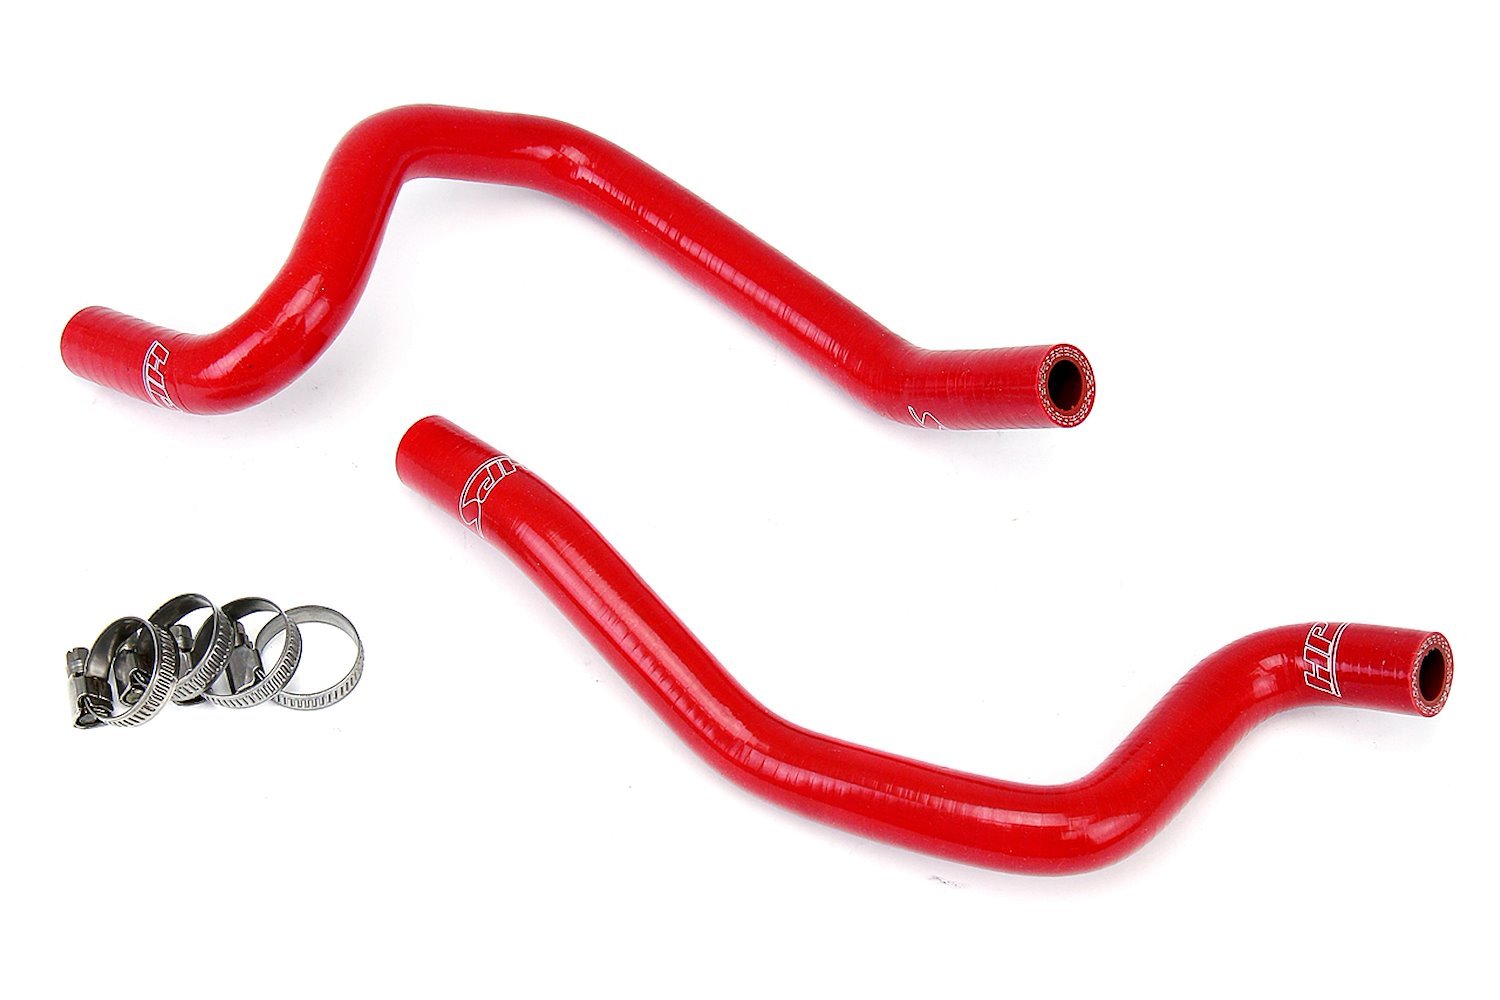 57-1802-RED Heater Hose Kit, 3-Ply Reinforced Silicone, Replace OEM Rubber Heater Coolant Hoses